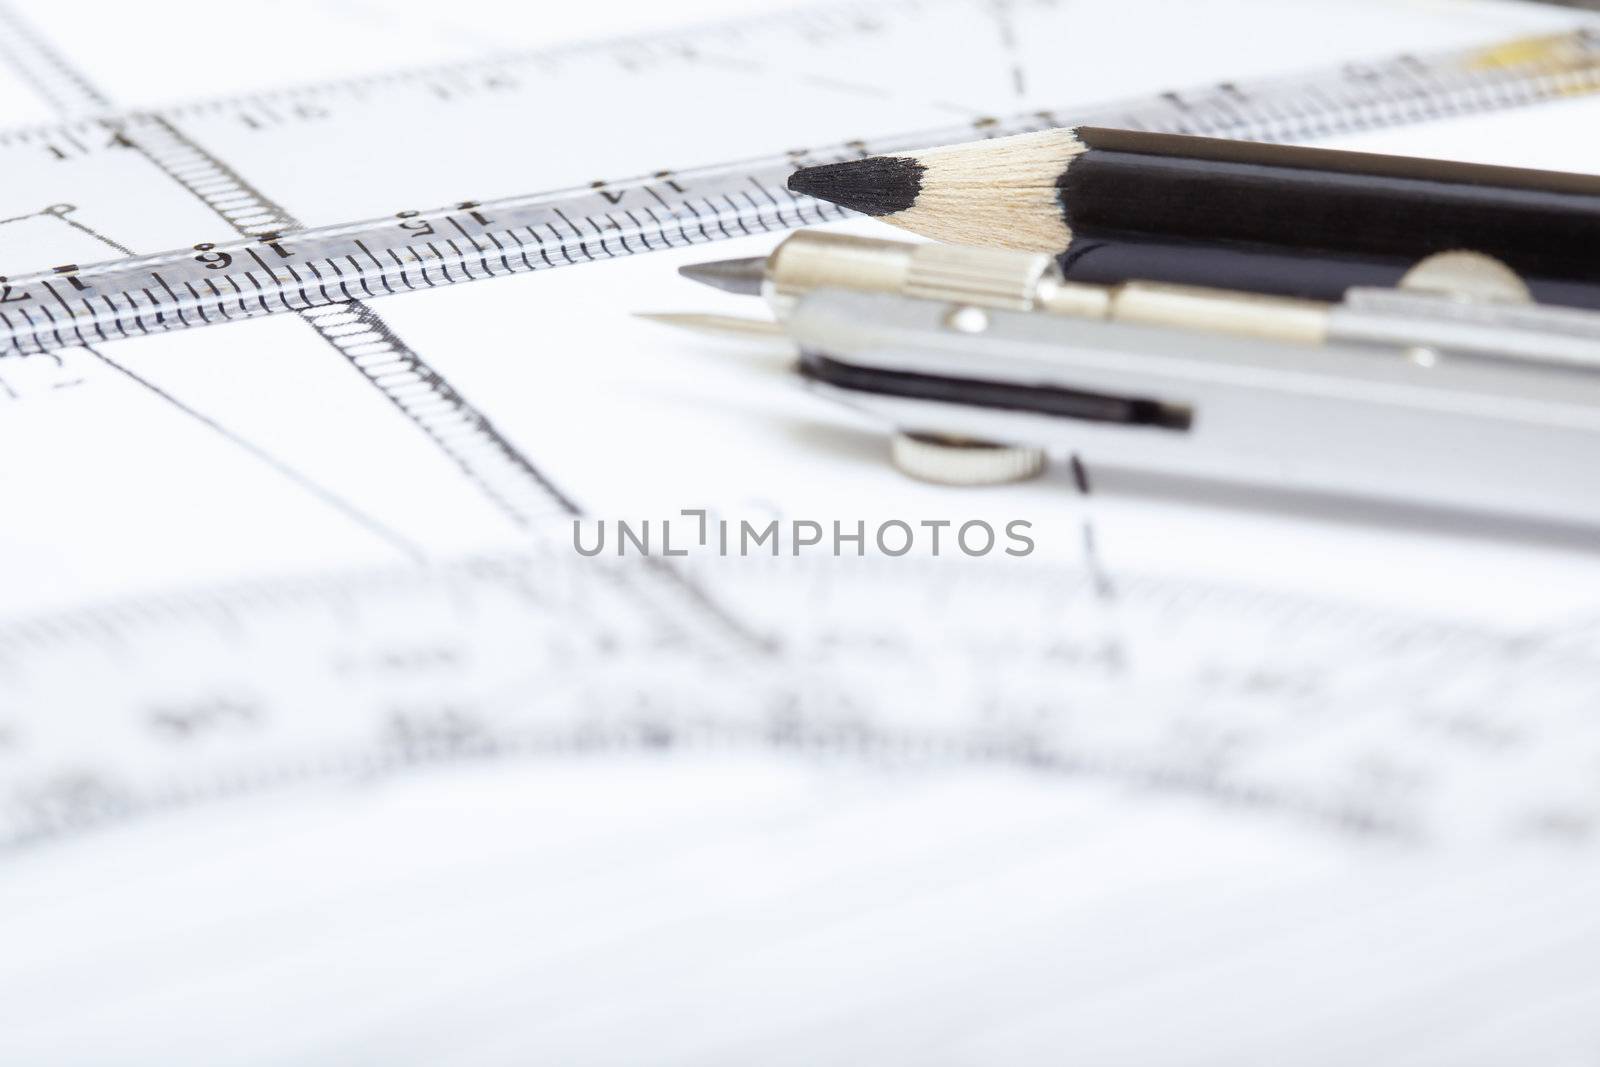 Scheme with drawing tools. Extremely close-up photo. Shallow depth of field